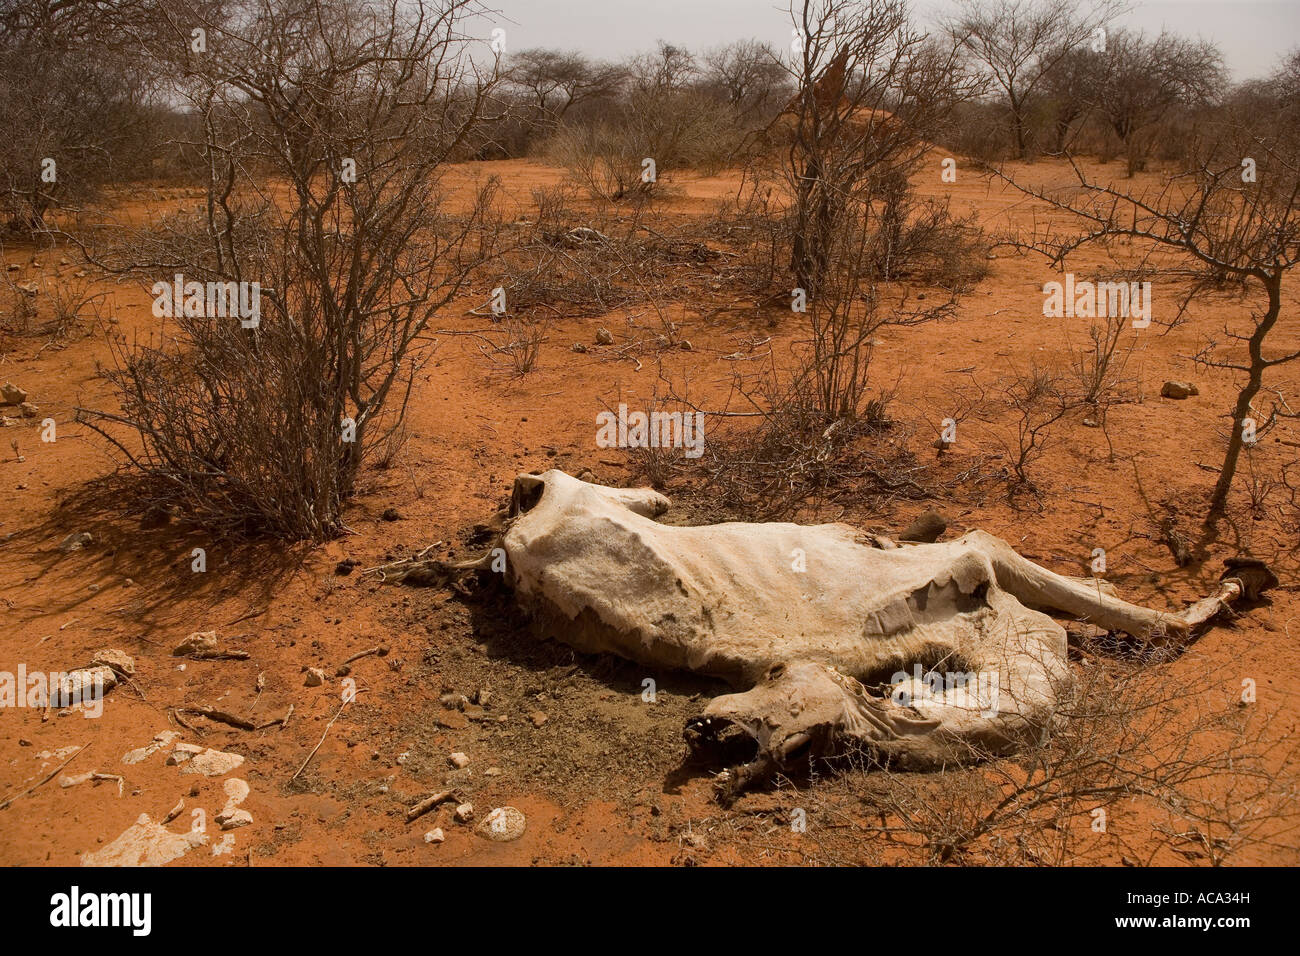 A camel lies dead by the side of the track, killed by Somalia's worst drought in 20 years Stock Photo